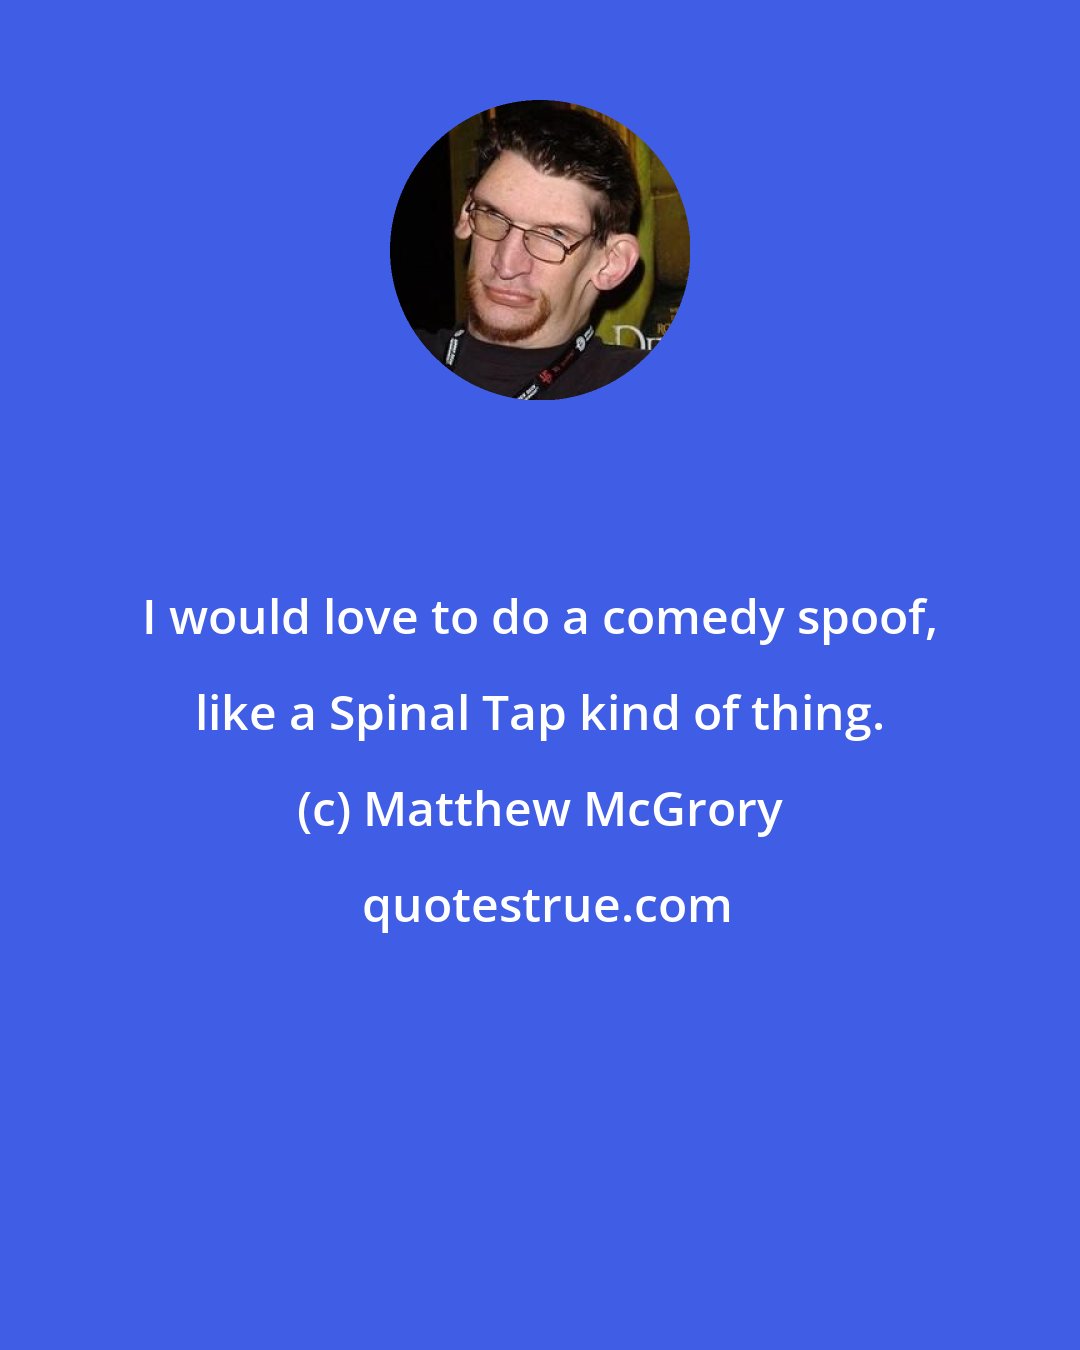 Matthew McGrory: I would love to do a comedy spoof, like a Spinal Tap kind of thing.